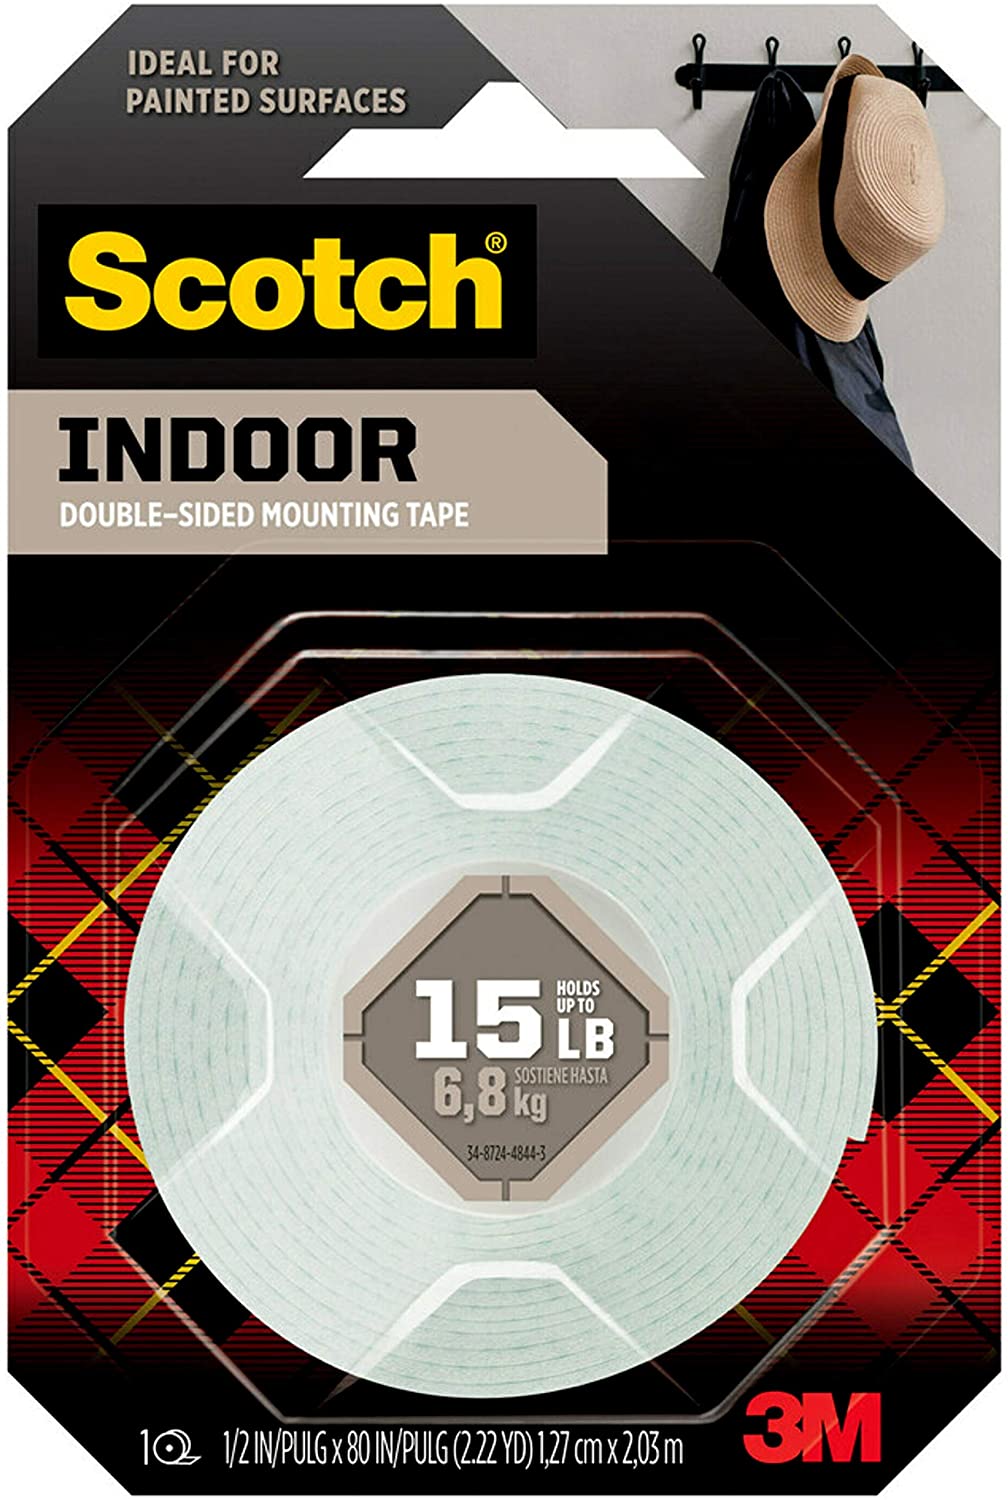 Scotch Indoor Mounting Tape, 1/2-in x 75-in, White, 1-Roll (110S-ESF) Ideal for Painted Surfaces